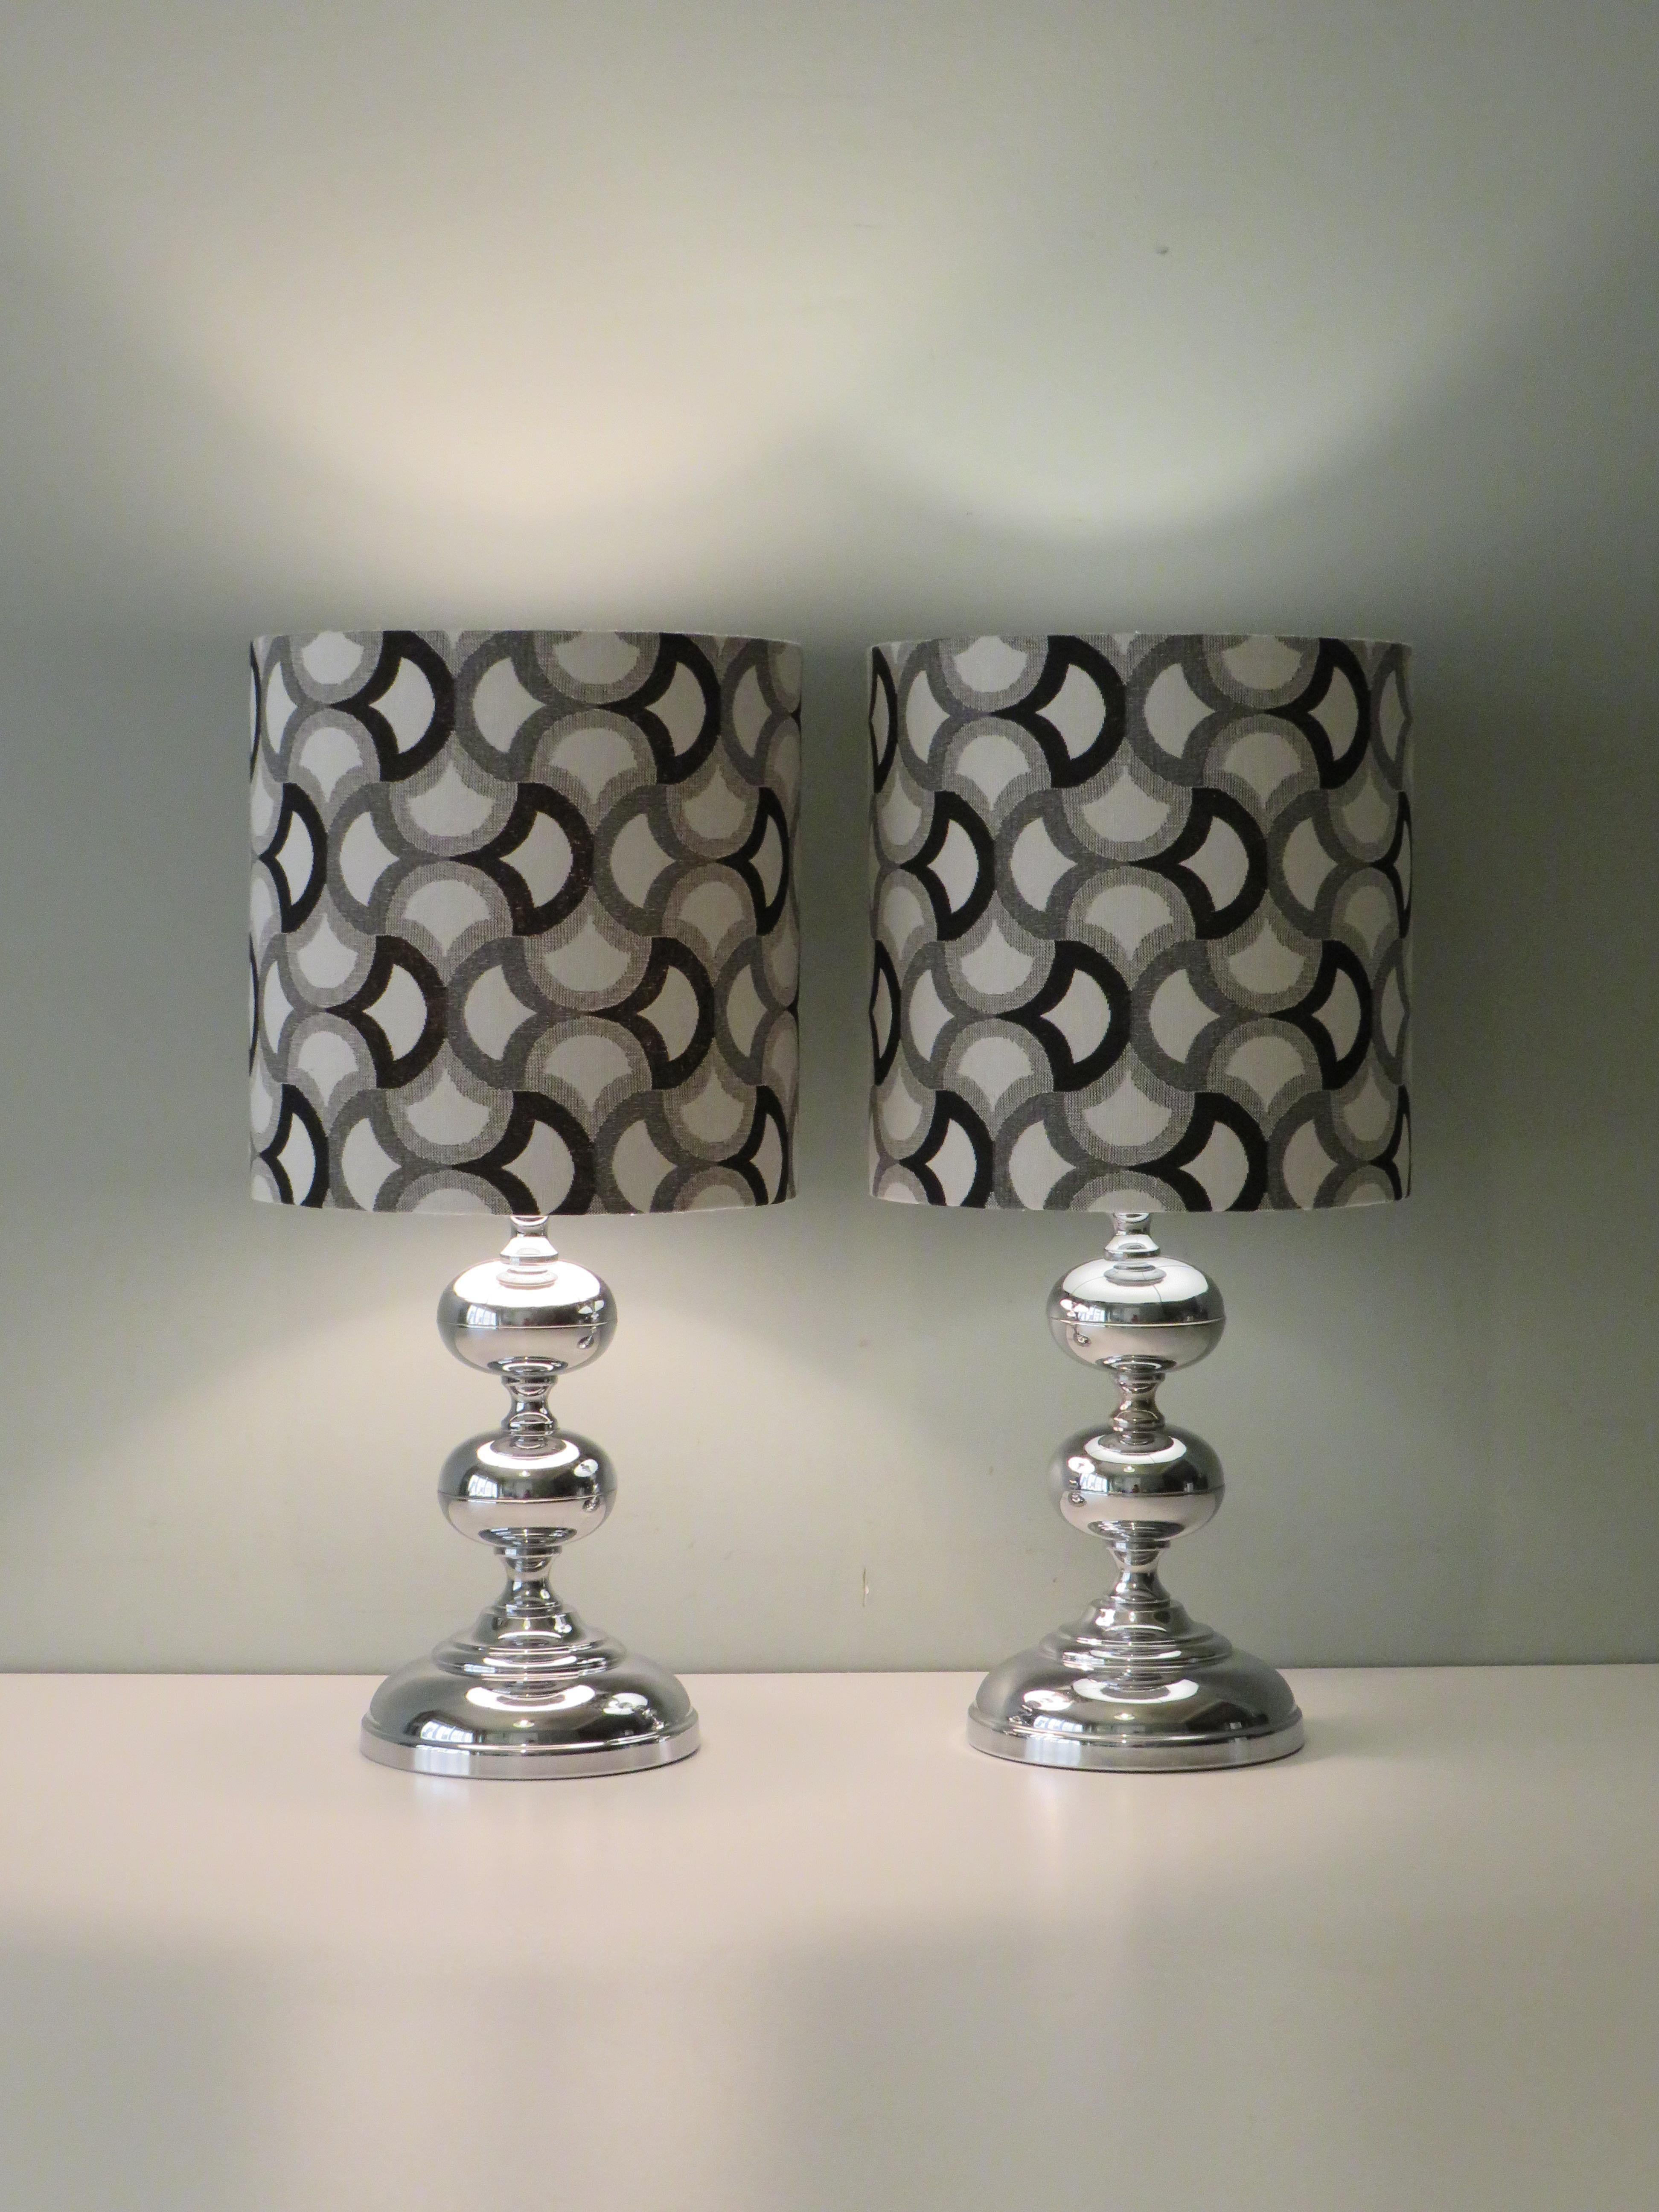 Set of 2 Space age, chromed table lamps, Belgium 1960.
The beautiful quality lamps with 1 E 27 fitting and a (new) custom lampshade in jacquard fabric.
Dimensions: lamp base H 35 cm and diameter 16 cm
lampshade: H 25.5 cm and diameter 25